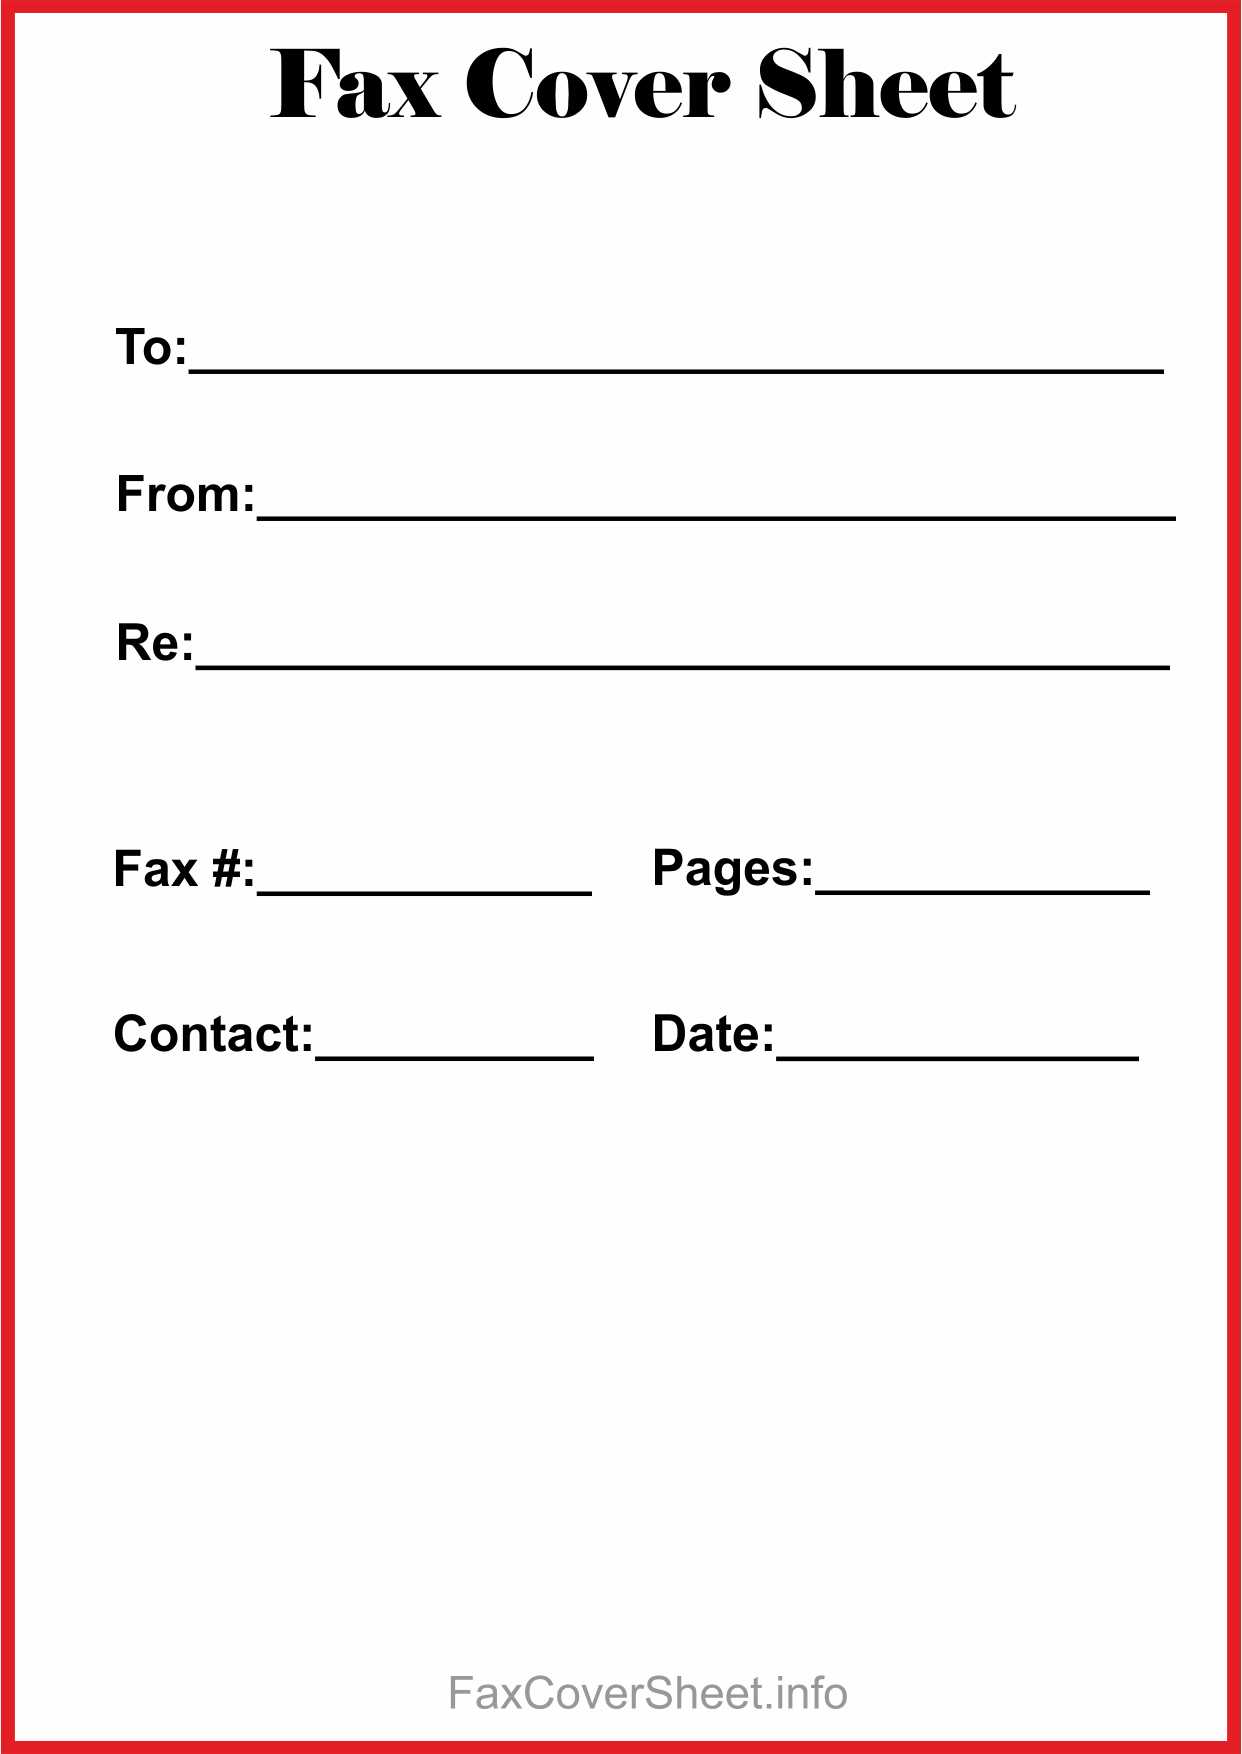 How To Find Blank Fax Cover Sheet Within Microsoft Word Inside Fax Template Word 2010